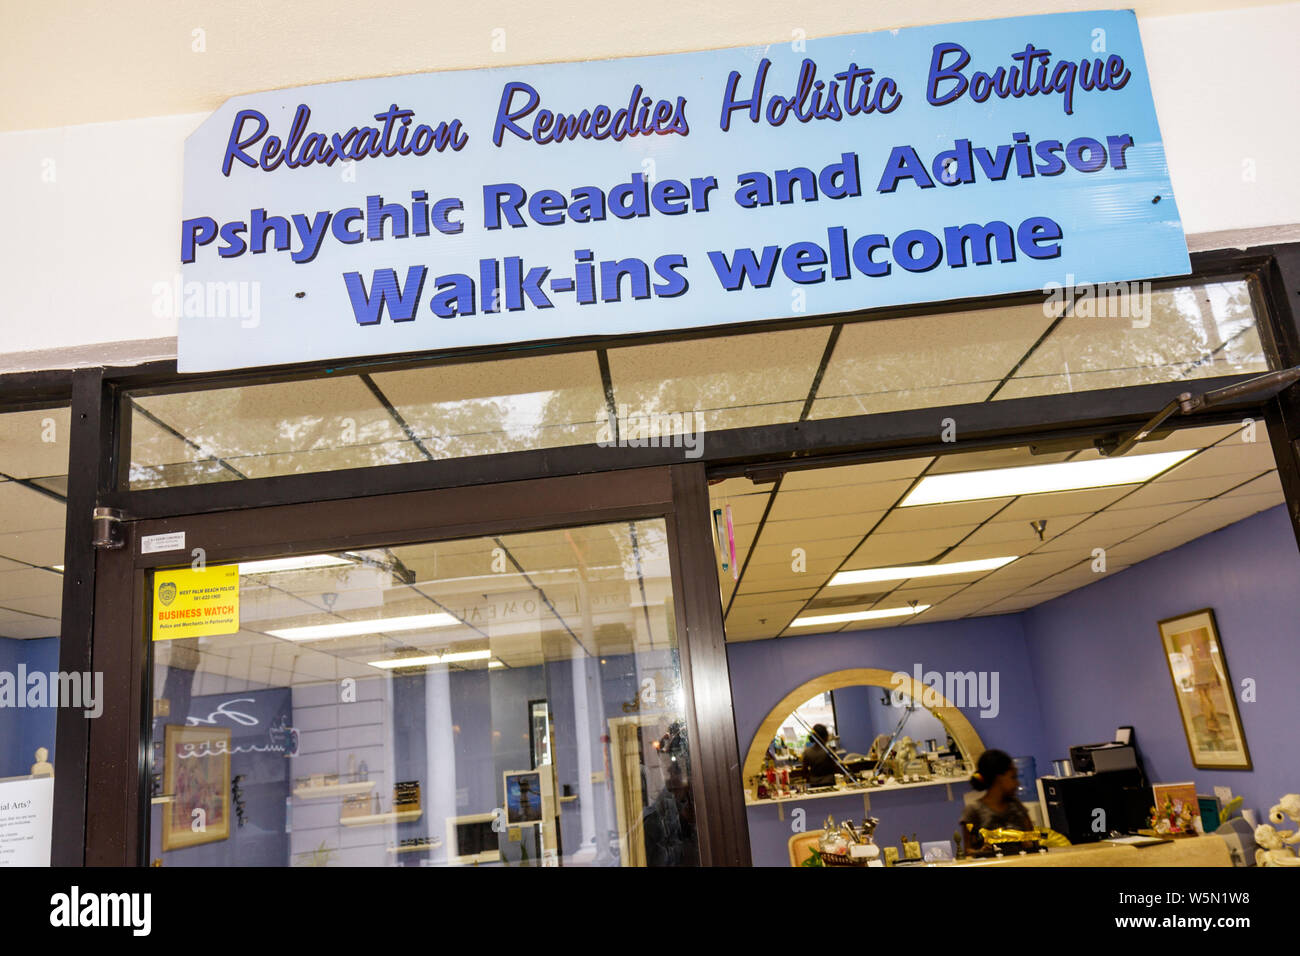 Floride,Palm Beach County,West Palm Beach,Clematis Street,relaxation Remedies Holisholic Boutique,New Age,lecteur psychique,mot mal orthographié,orthographe,mistak Banque D'Images